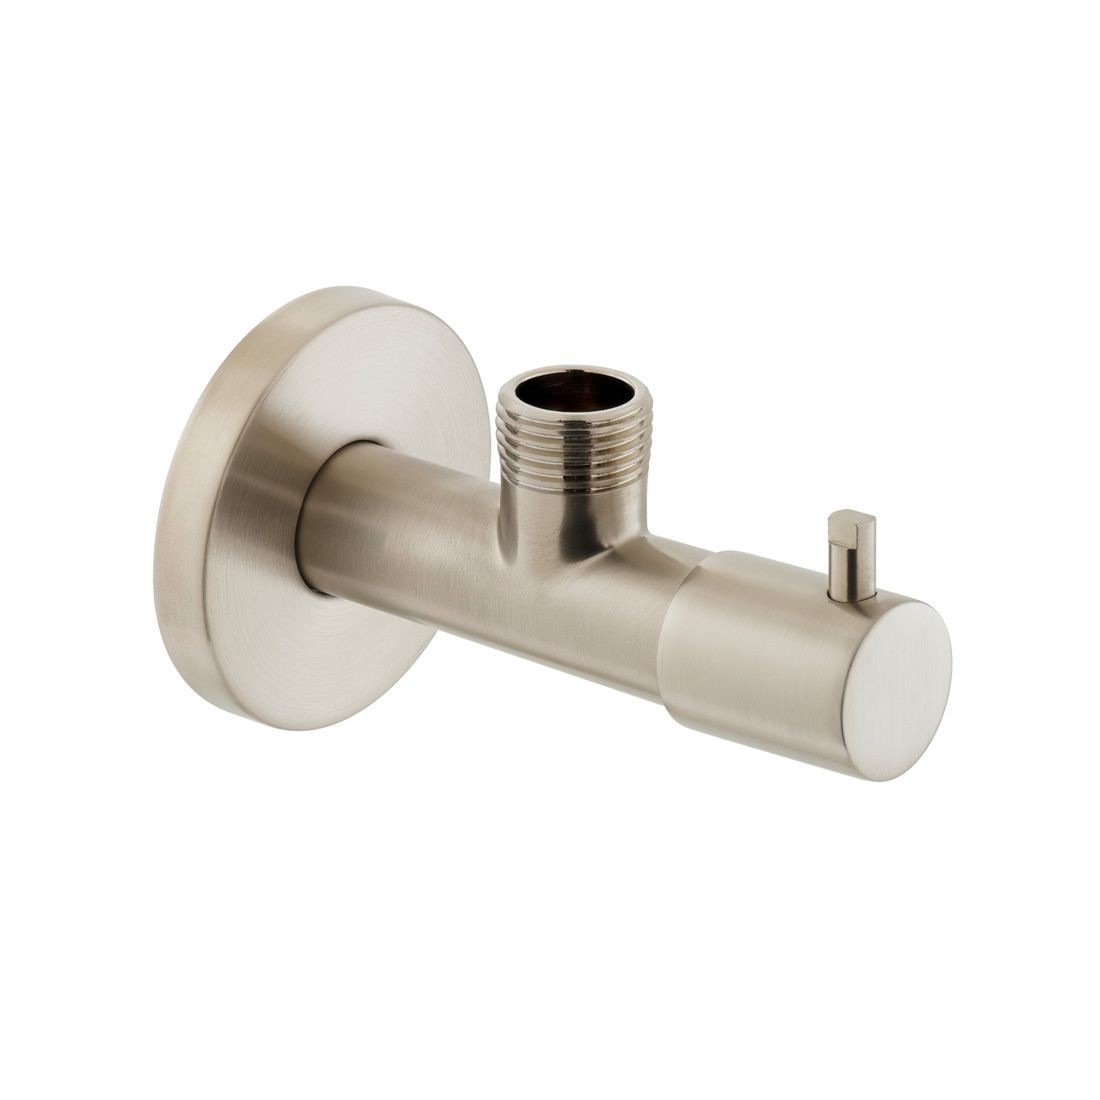 Individual by Vado Angle Valve 1/2 x 1/2 inch Brushed Nickel [IND-230-BRN]